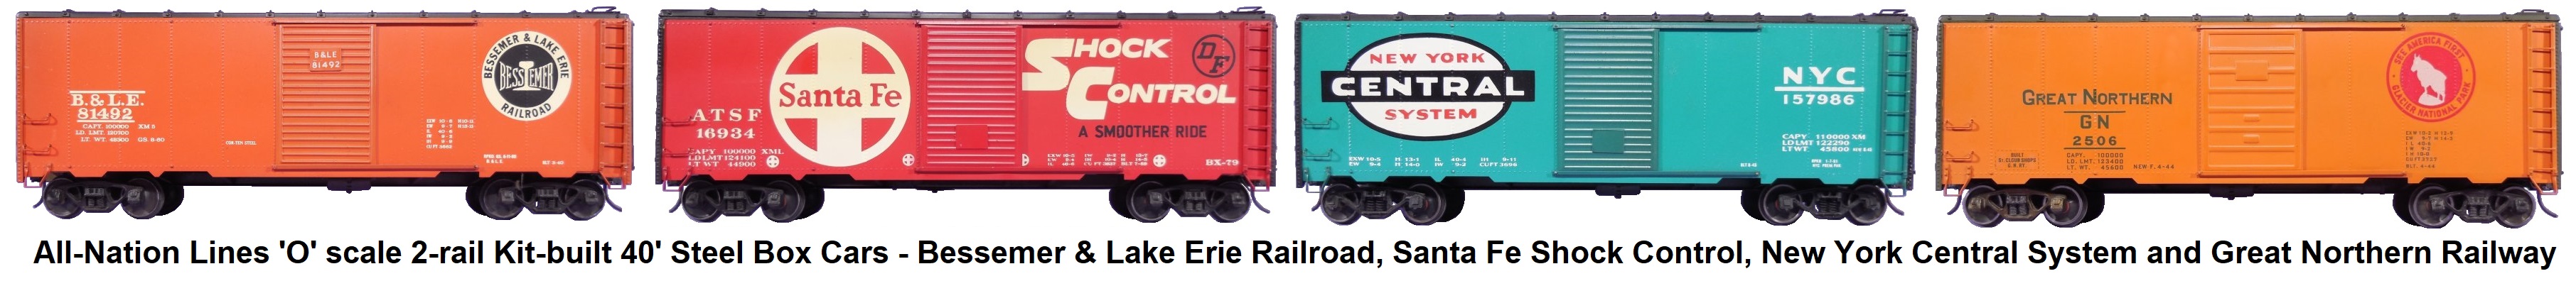 All-Nation 'O' scale 40' Steel Kit-built Box Cars - #6202 Bessemer & Lake Erie (orange), #3665 A.T.S.F. Shock Control (red), #3666 New York Central (jade green), and #3645 Great Northern